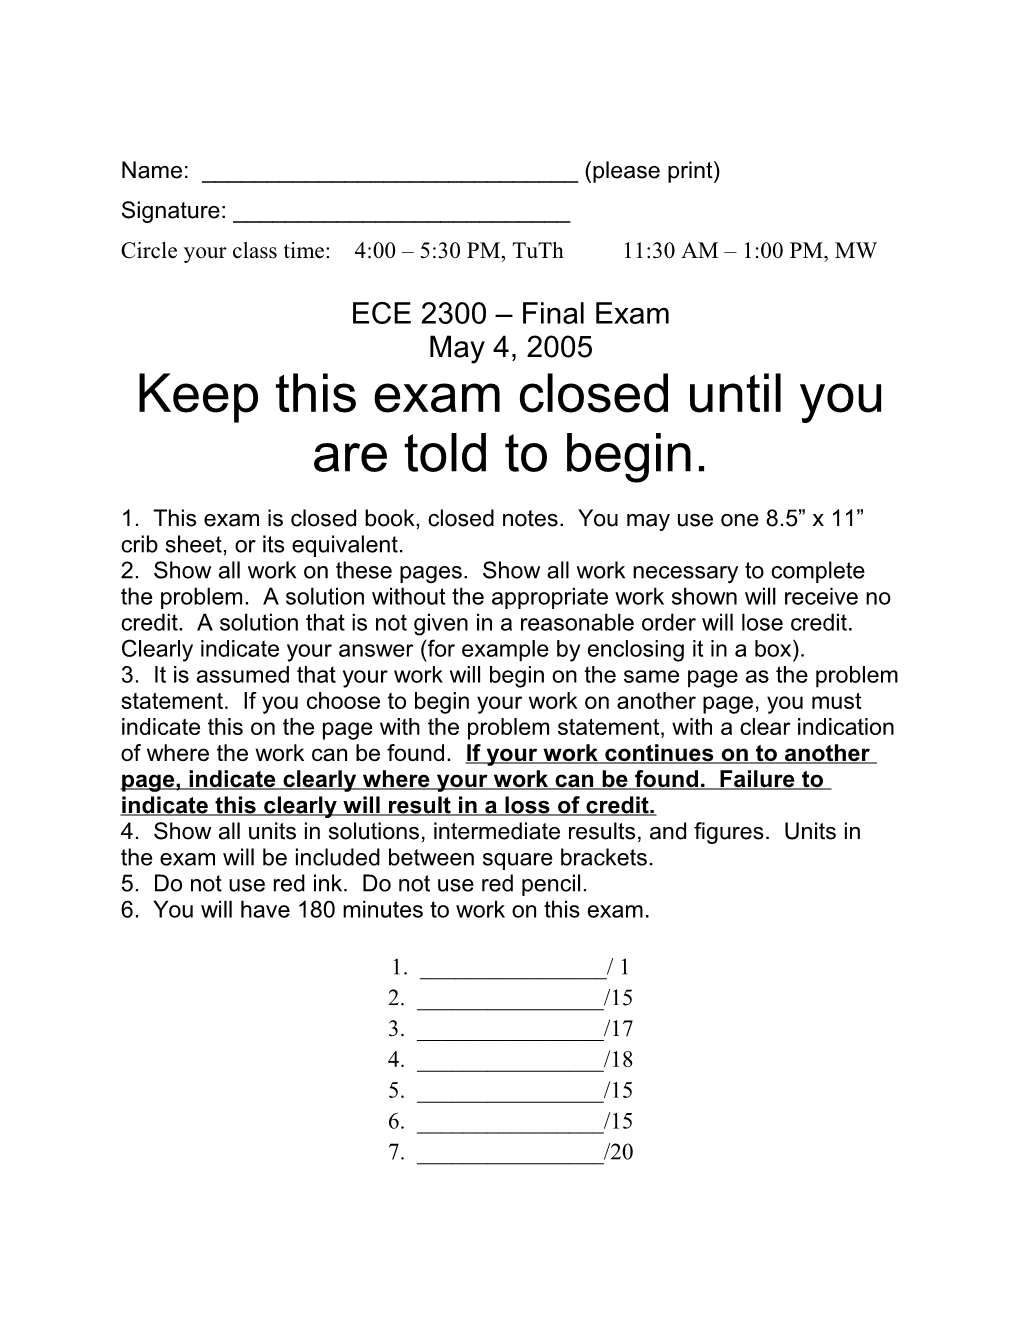 ECE 2300 Final Exam, May 4, 2005 Page 1